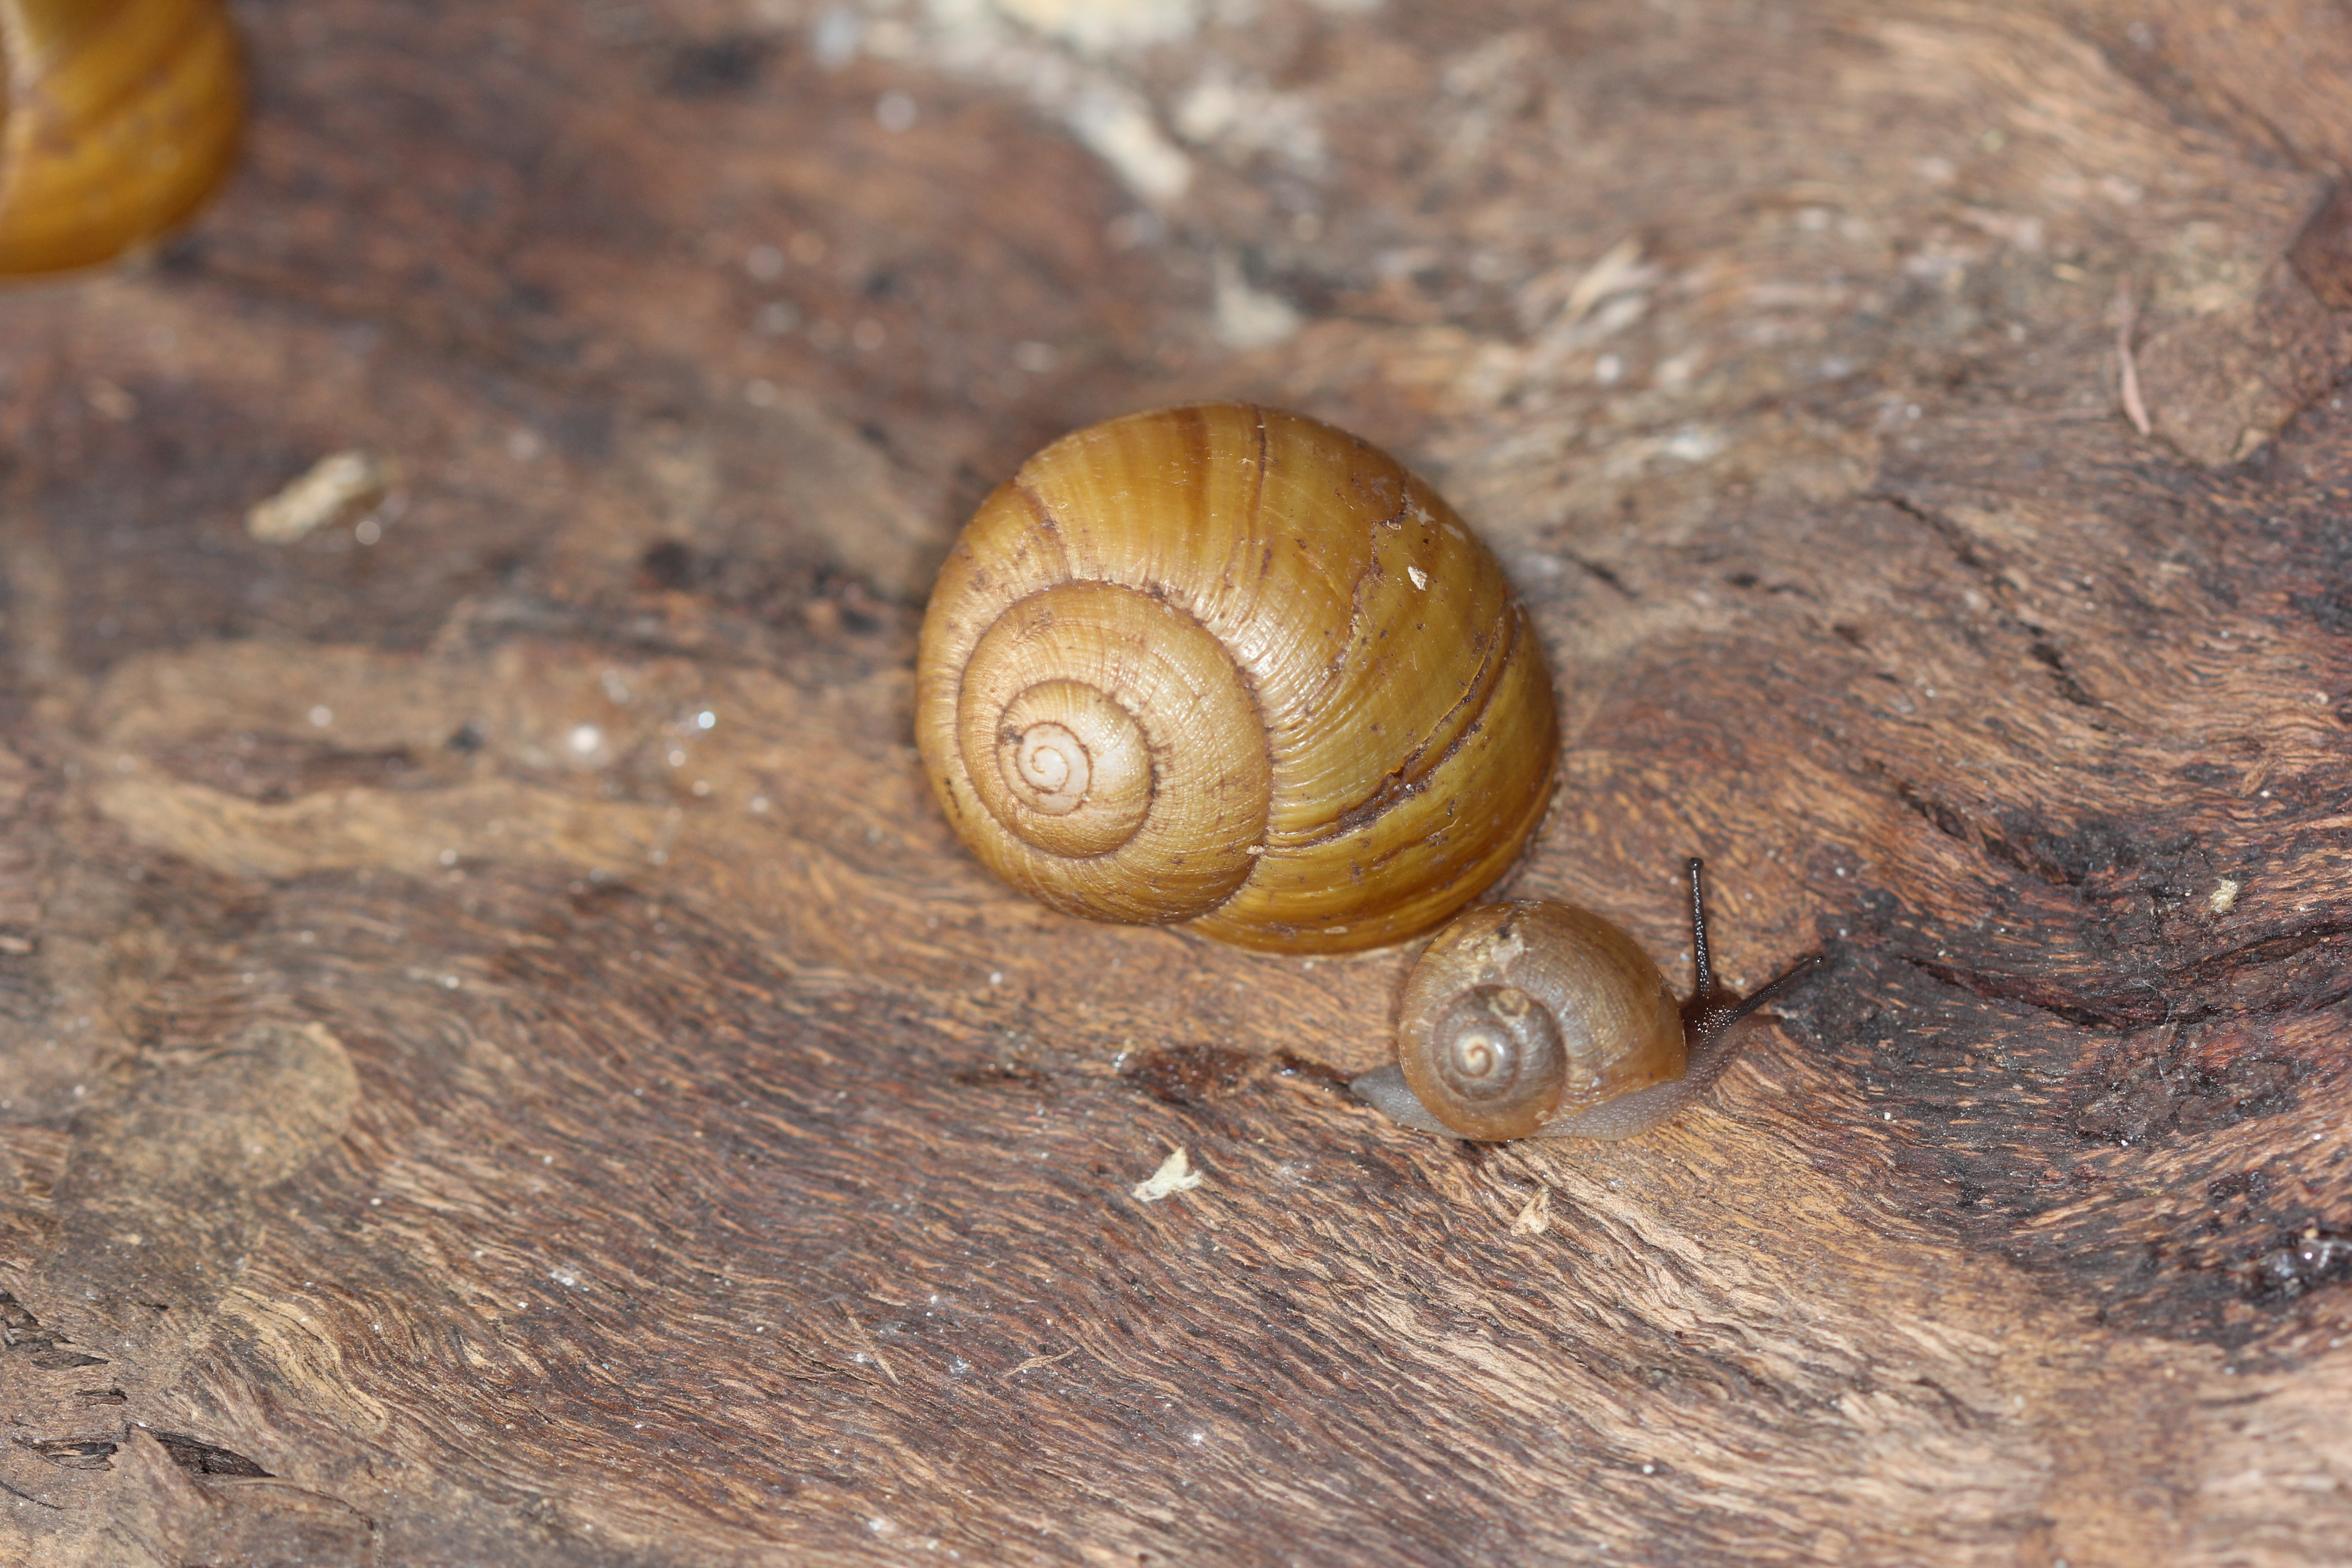 Are snails born with shells? | Facts About Snails